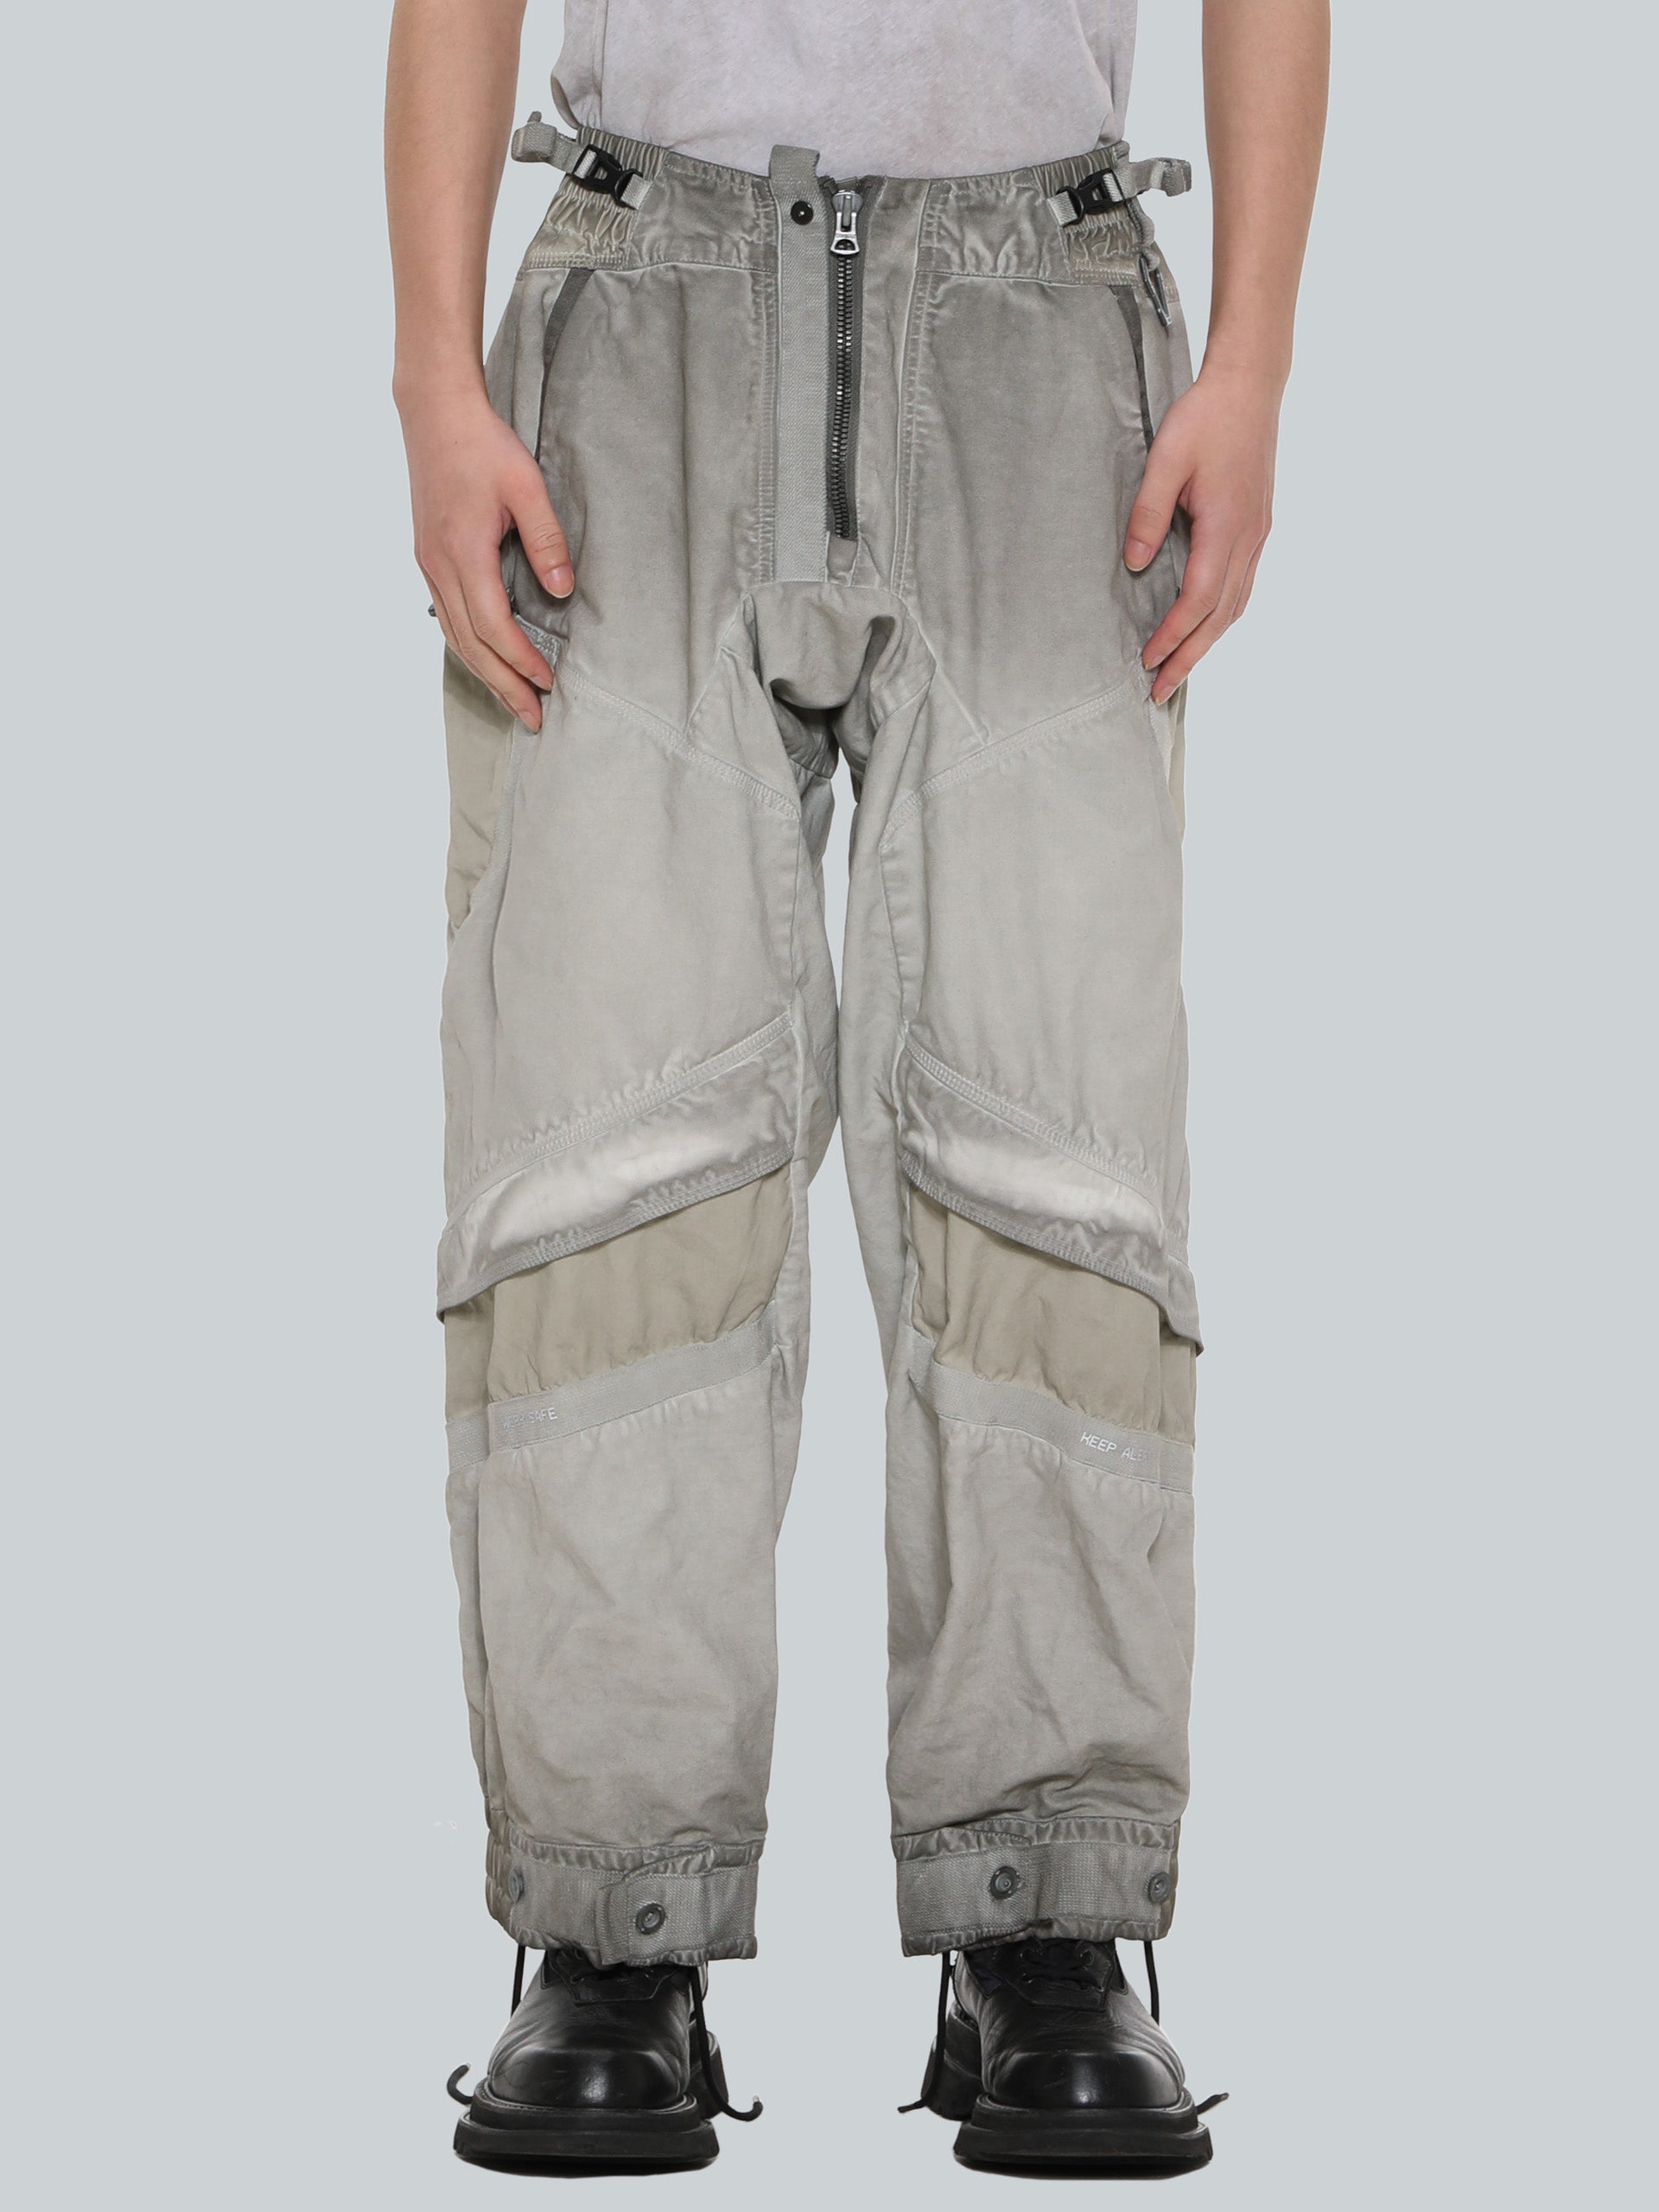 Mens Sweatpants Men's Mid-waist Zip Cargo Pants Relaxed Fit Solid Cargo  Trousers With Multi-pocket - Walmart.com